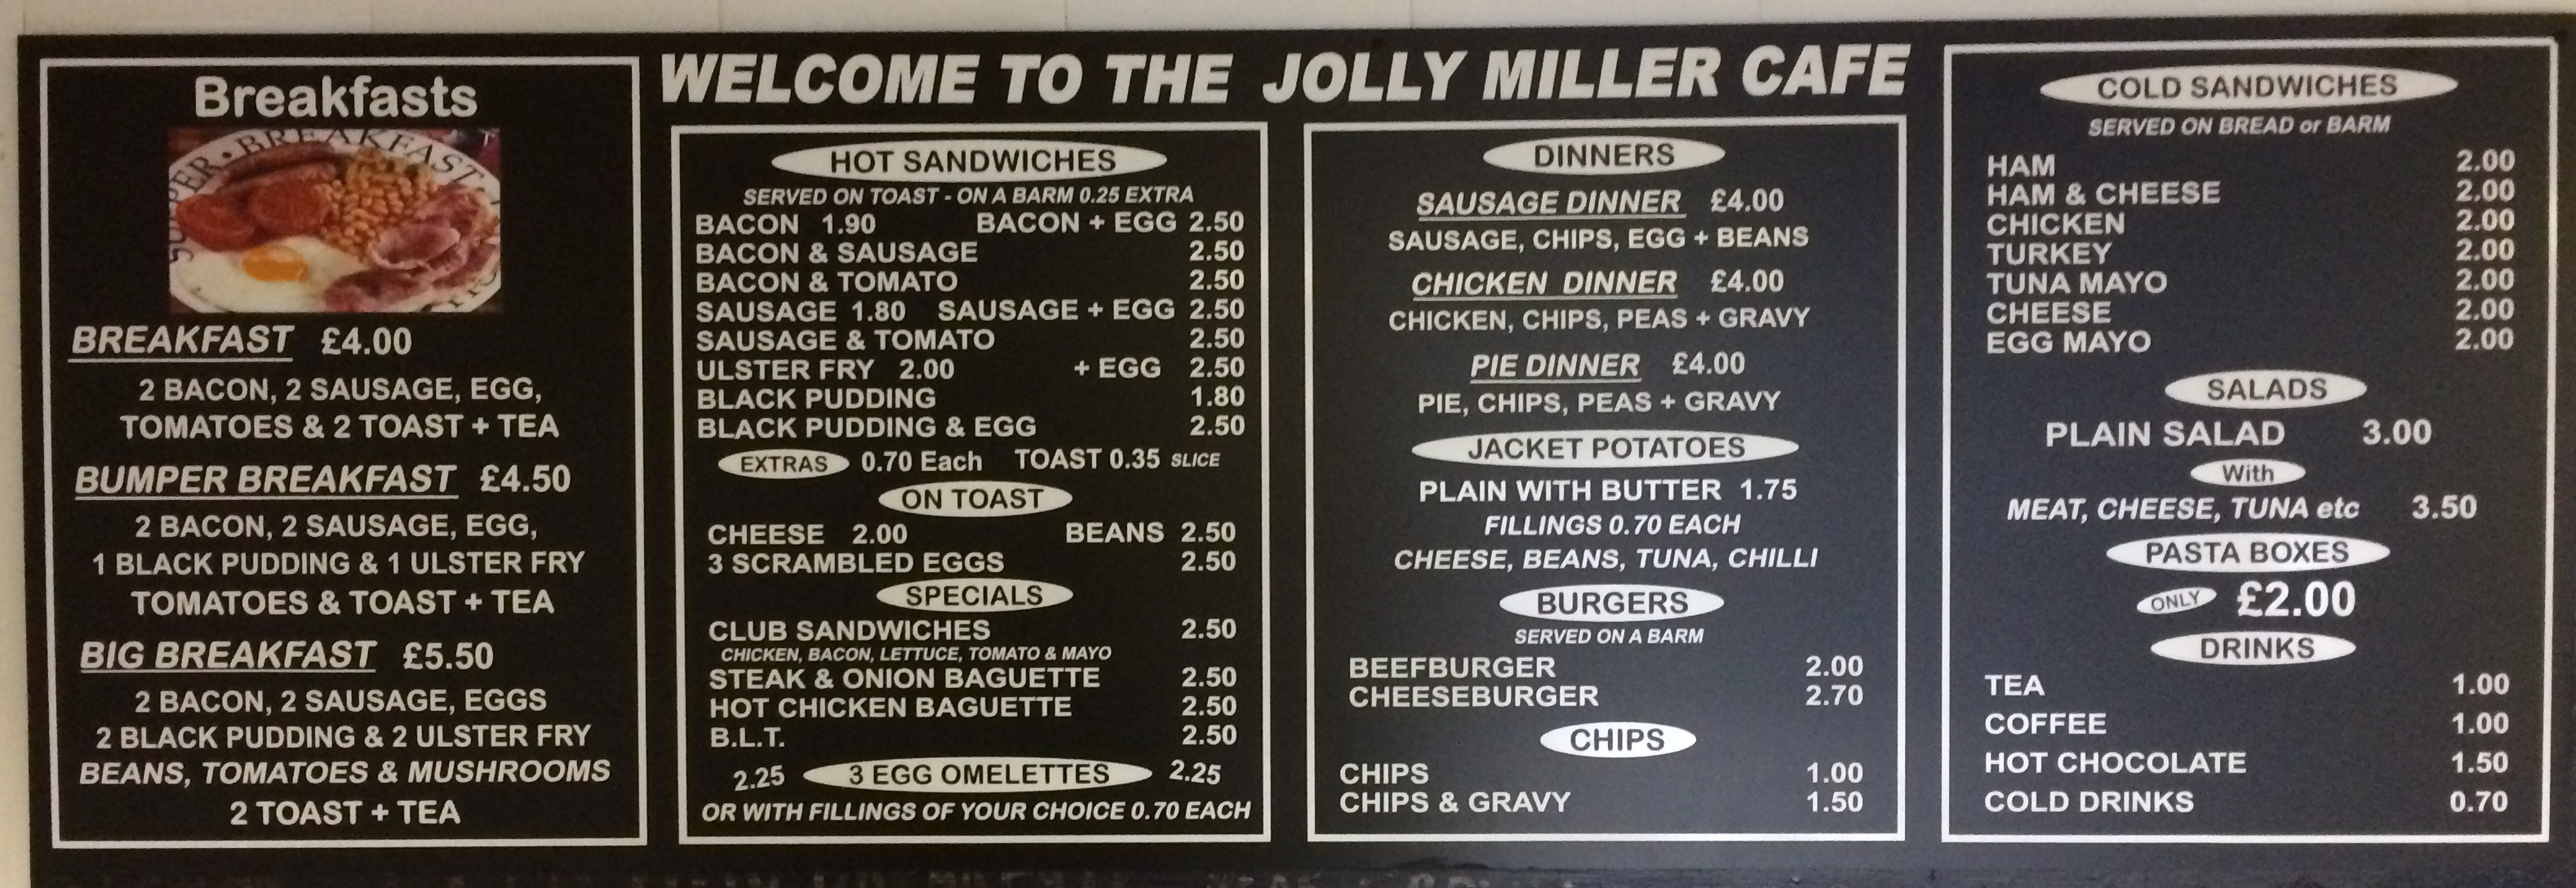 A large photo of the menu taken from the cafe